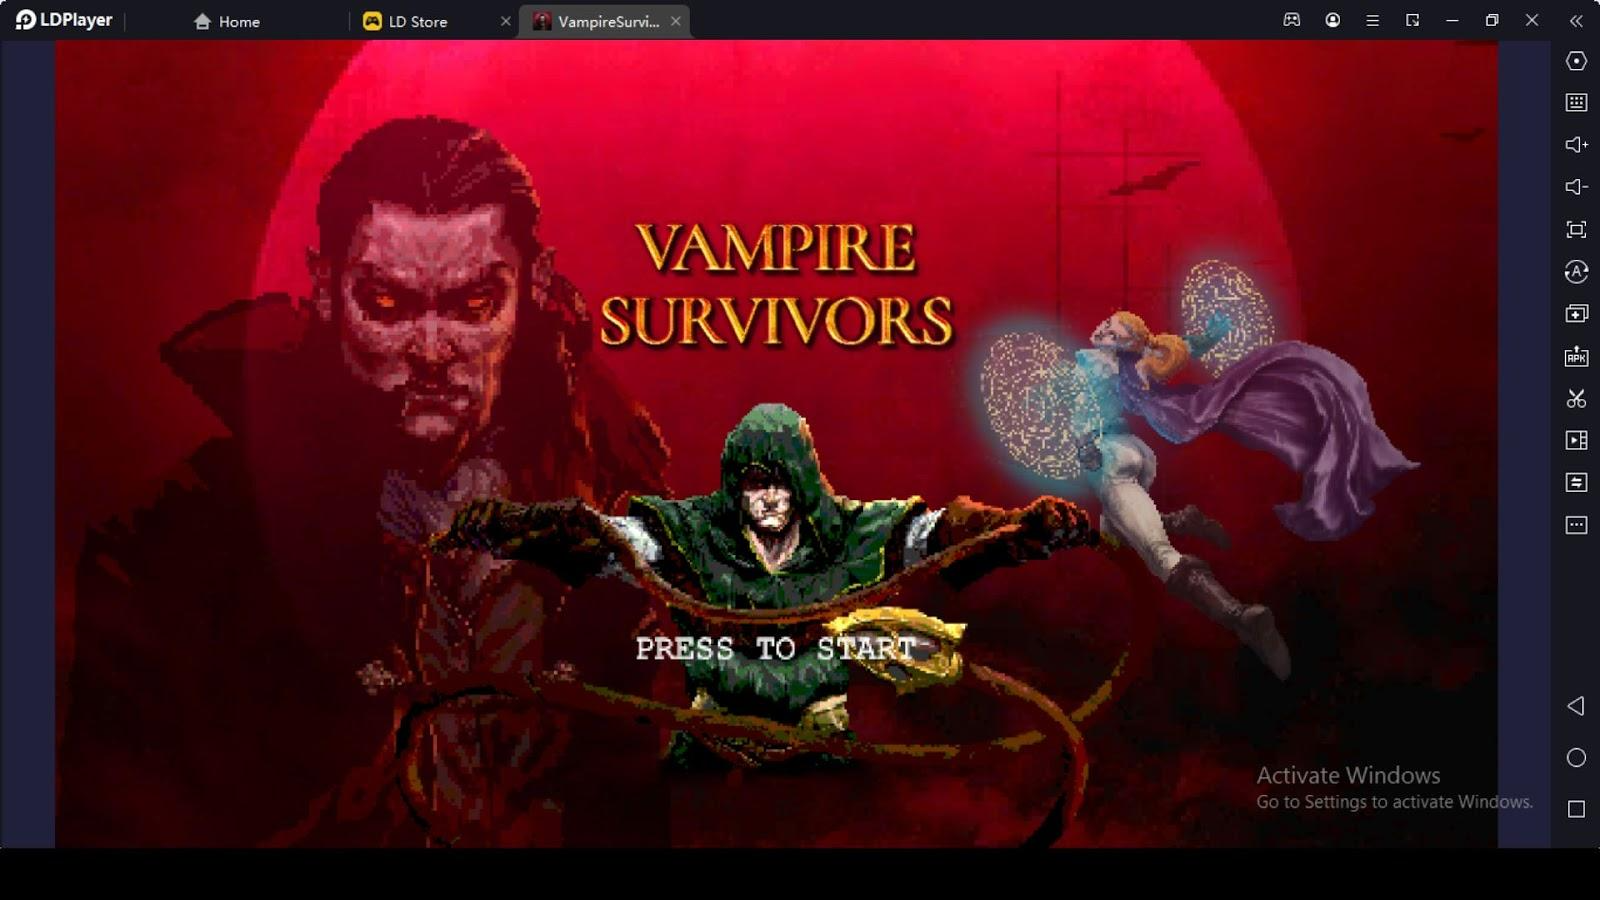 Getting all of the achievements in Vampire Survivors.